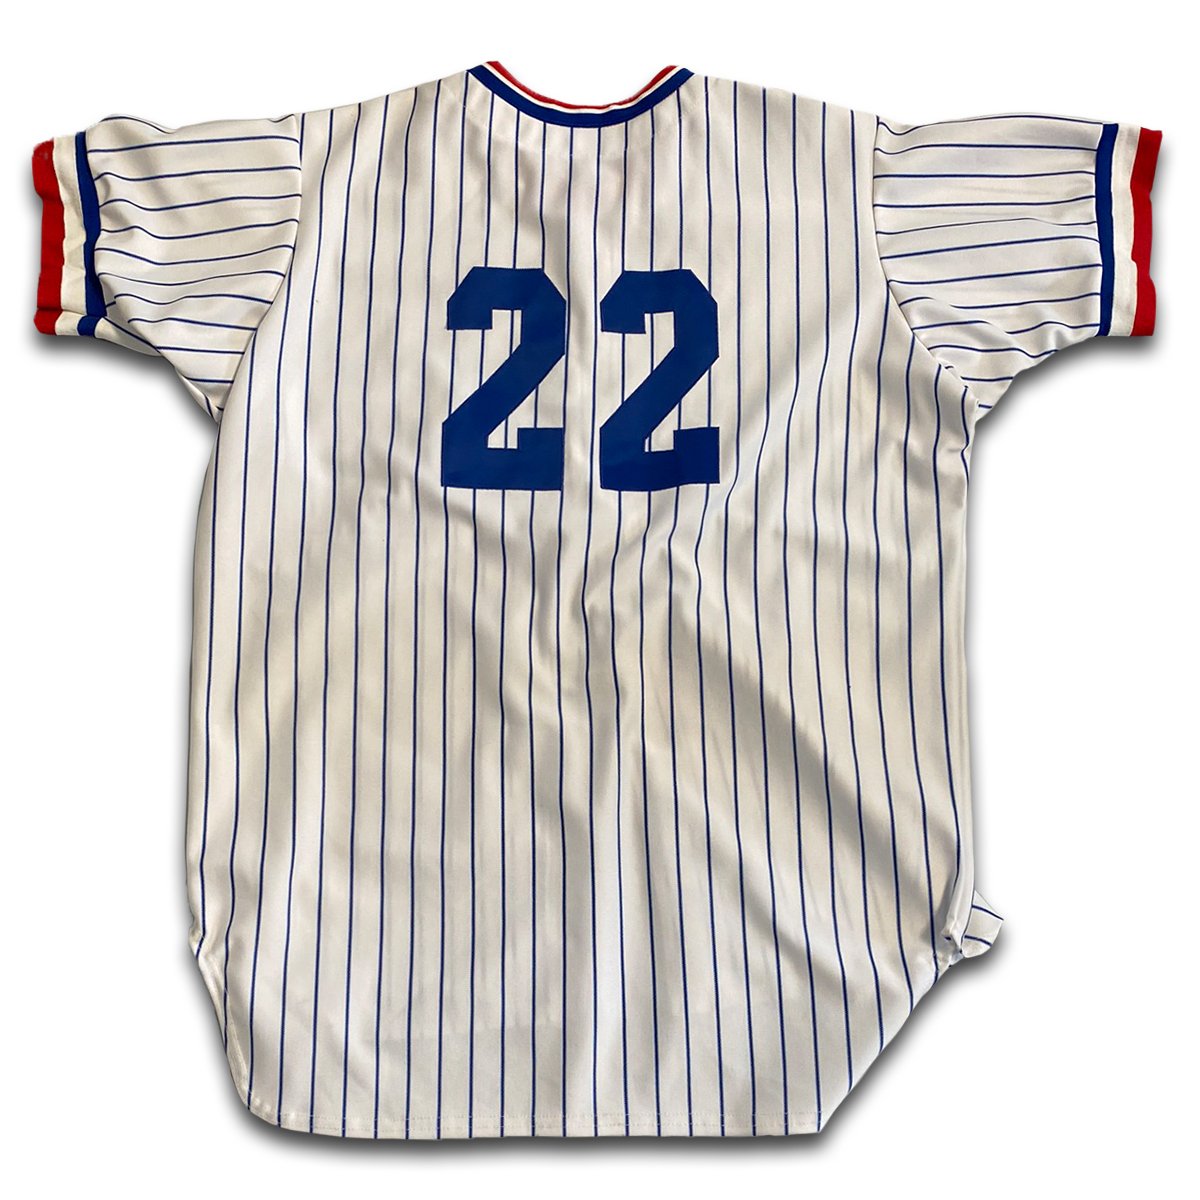 Columbus Clippers Retro Royal Pinstripe #22 Authentic Jersey